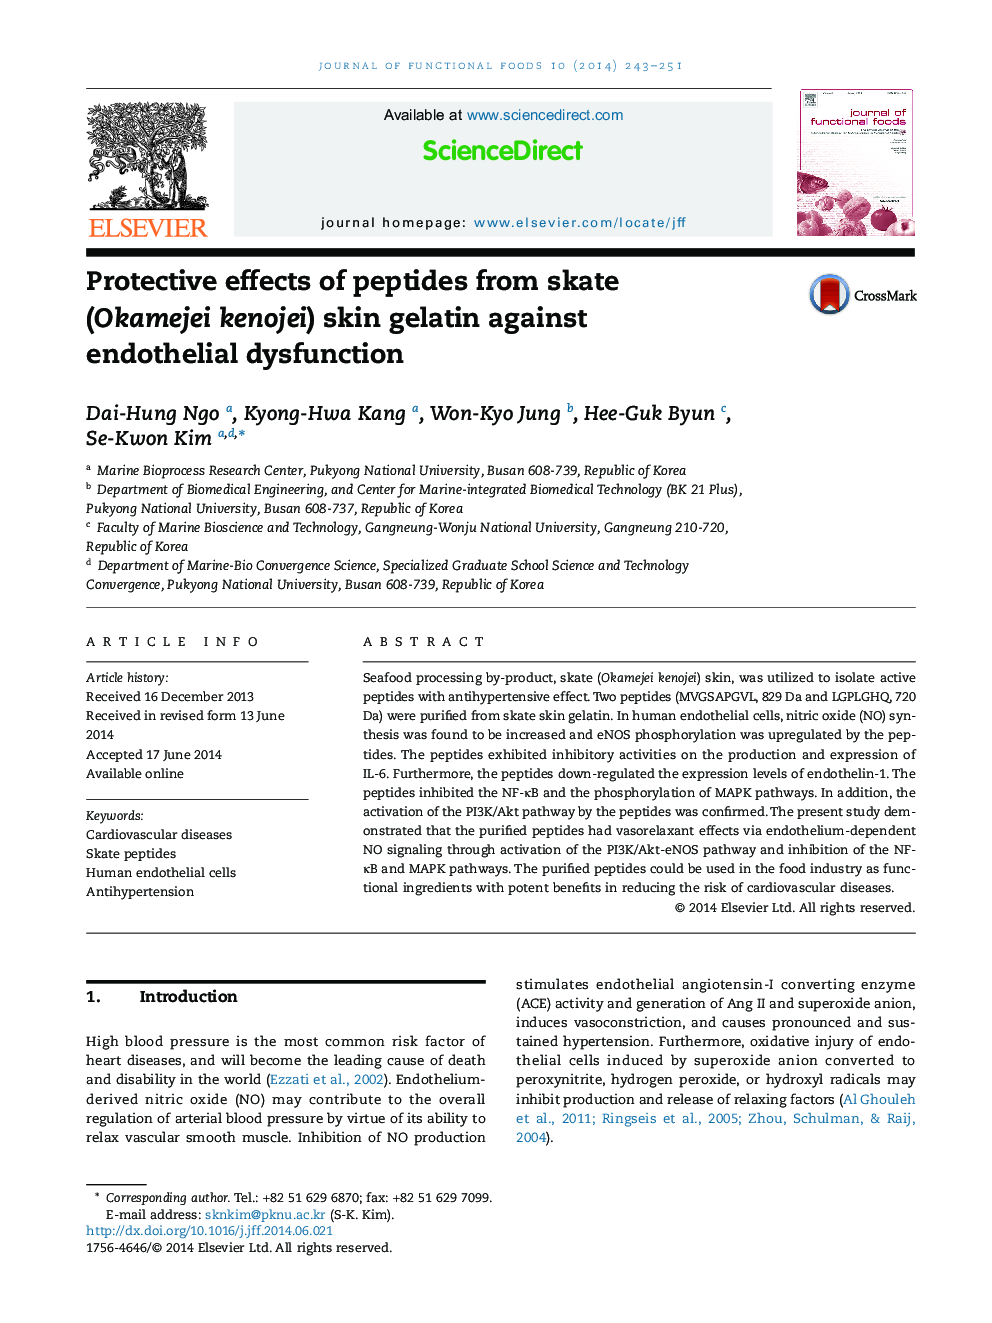 Protective effects of peptides from skate (Okamejei kenojei) skin gelatin against endothelial dysfunction